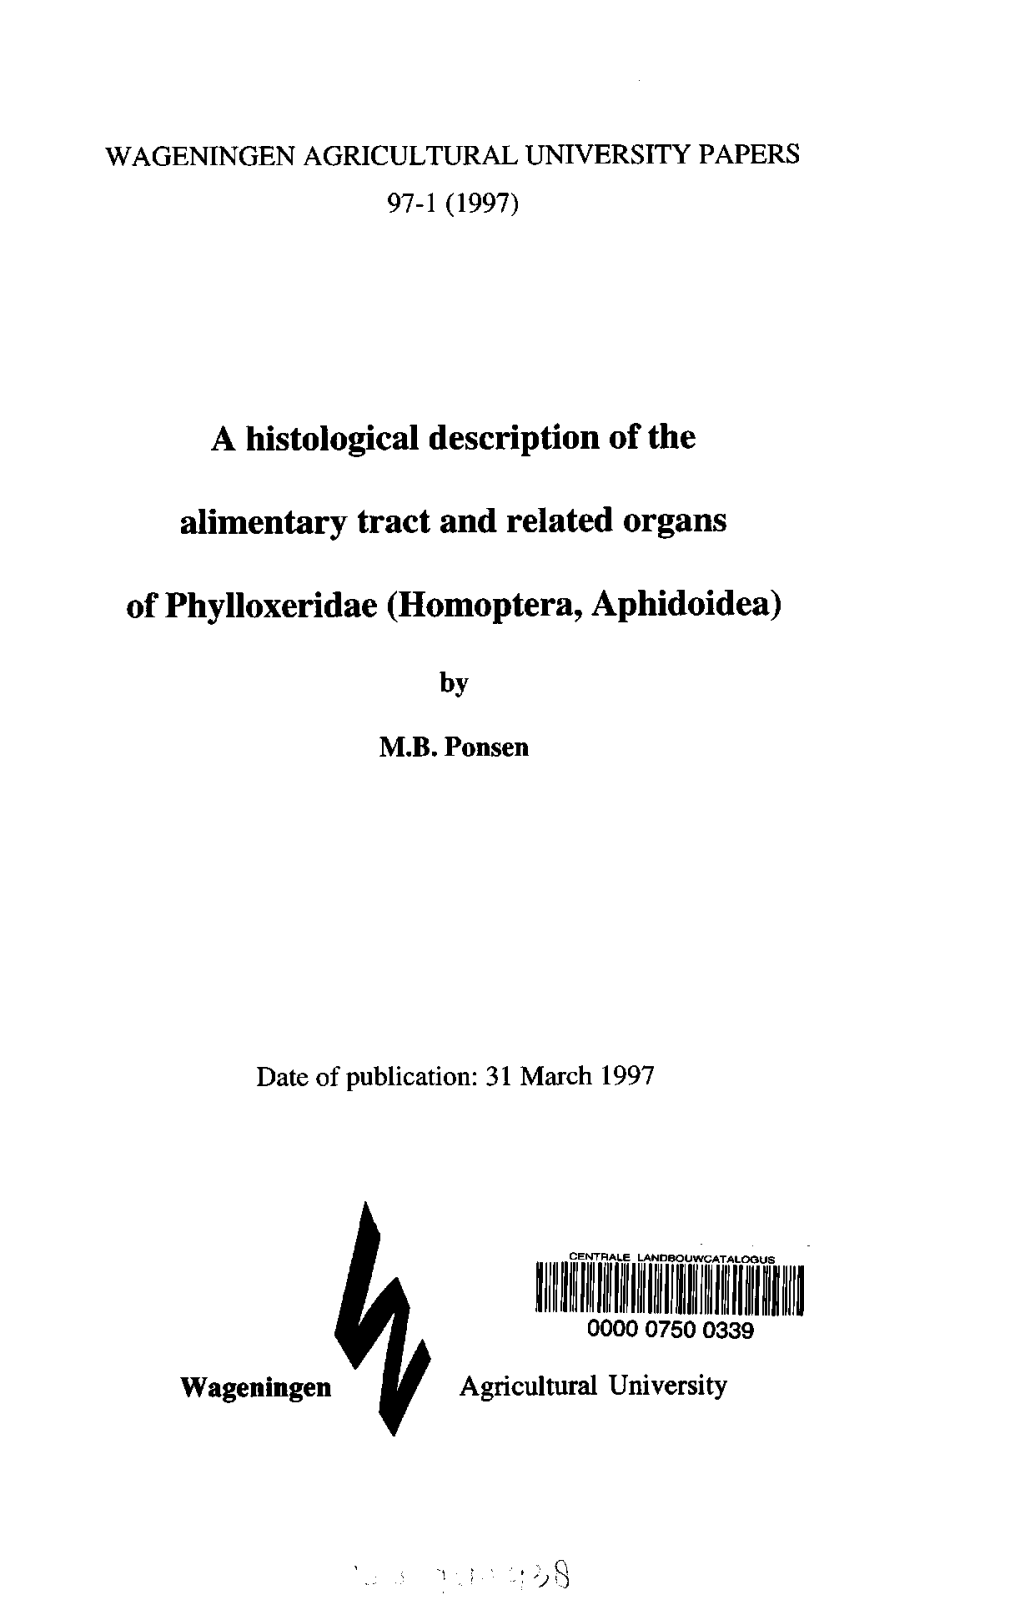 A Histological Description of the Alimentary Tract And